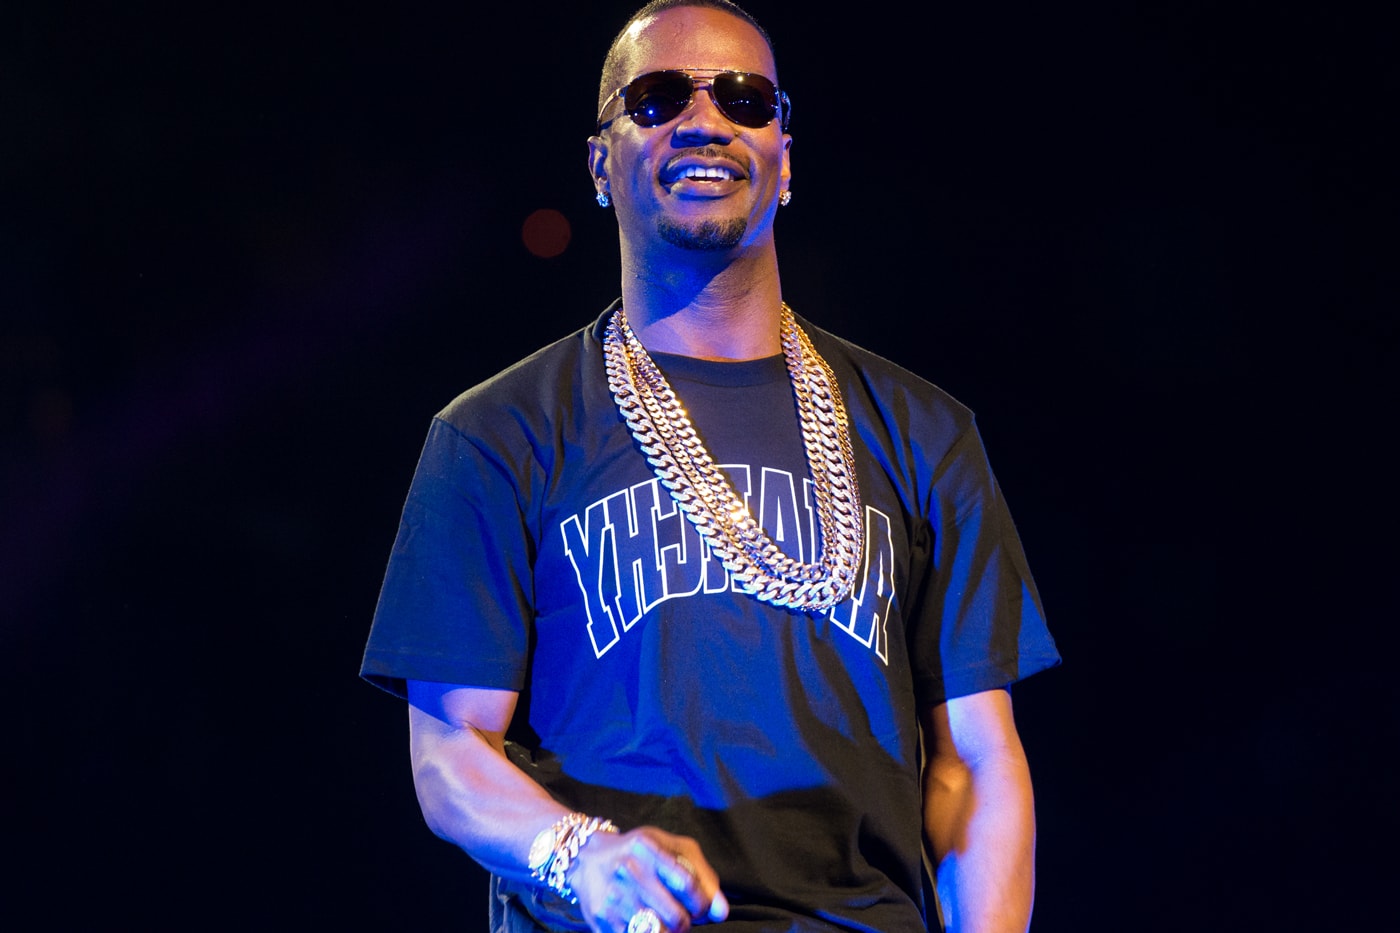 Juicy J Previews New Song Featuring Travi$ Scott, "No English"